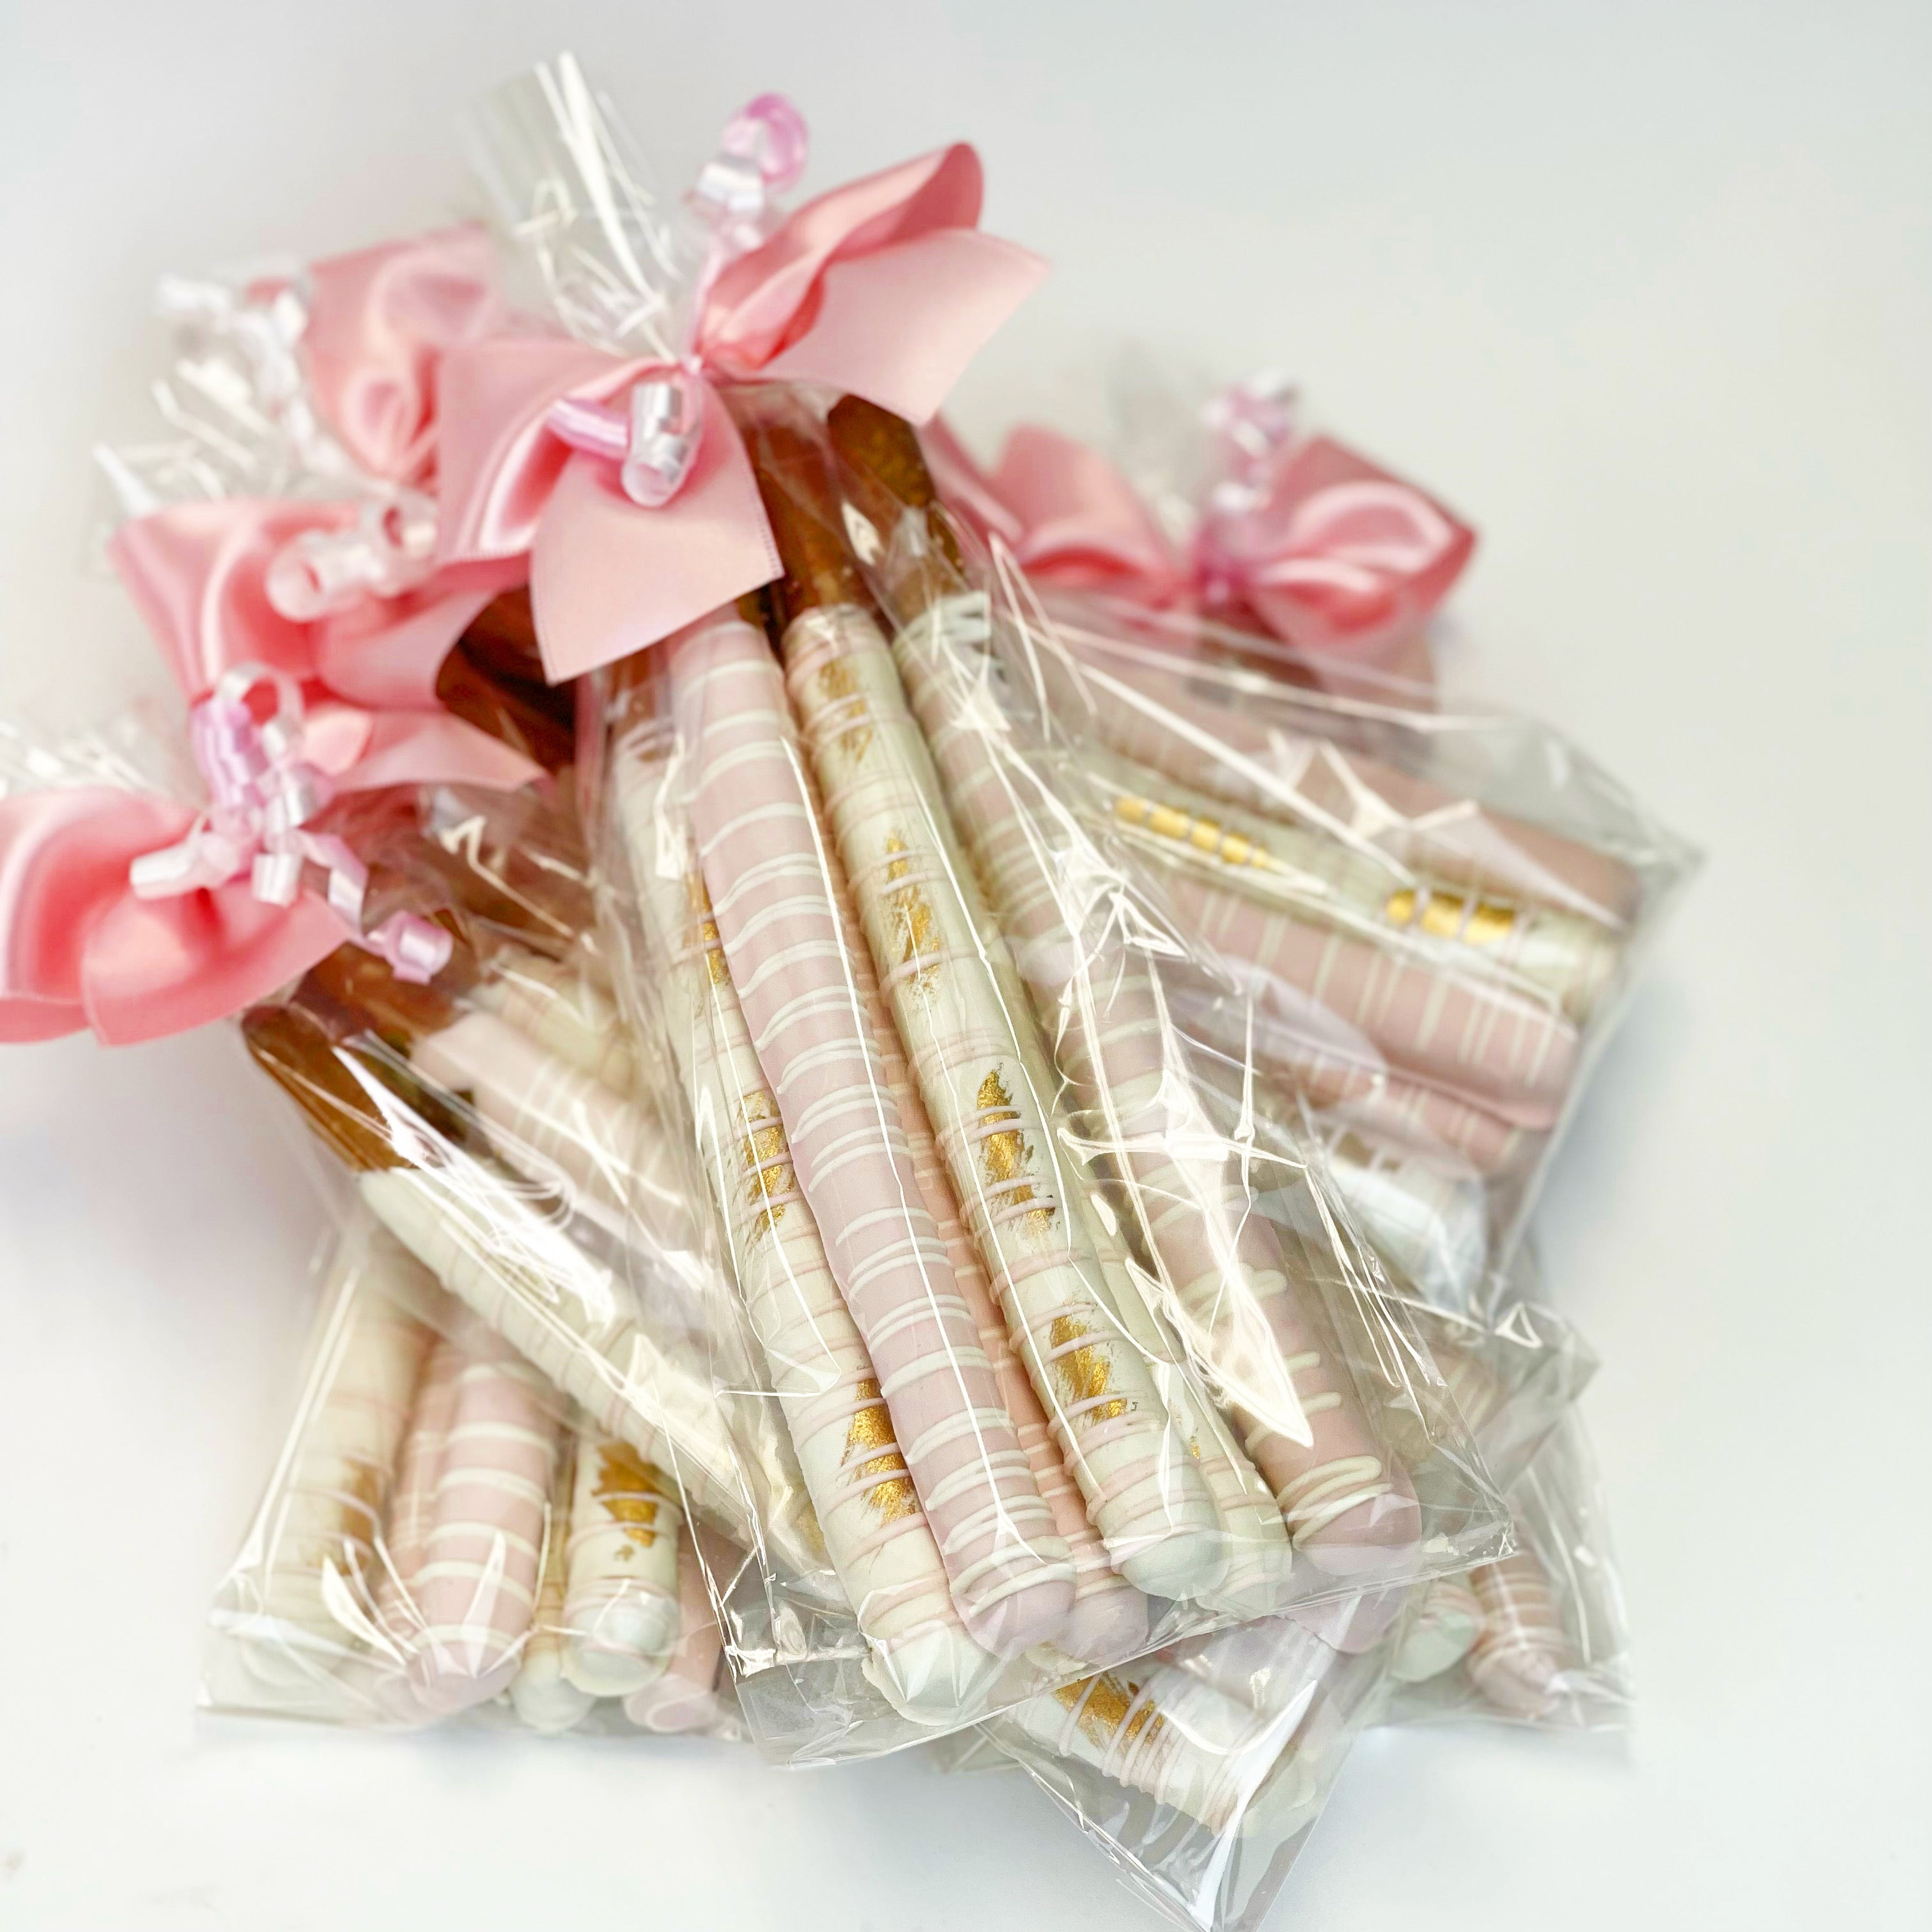 Chocolate Covered Pink and White Pretzels